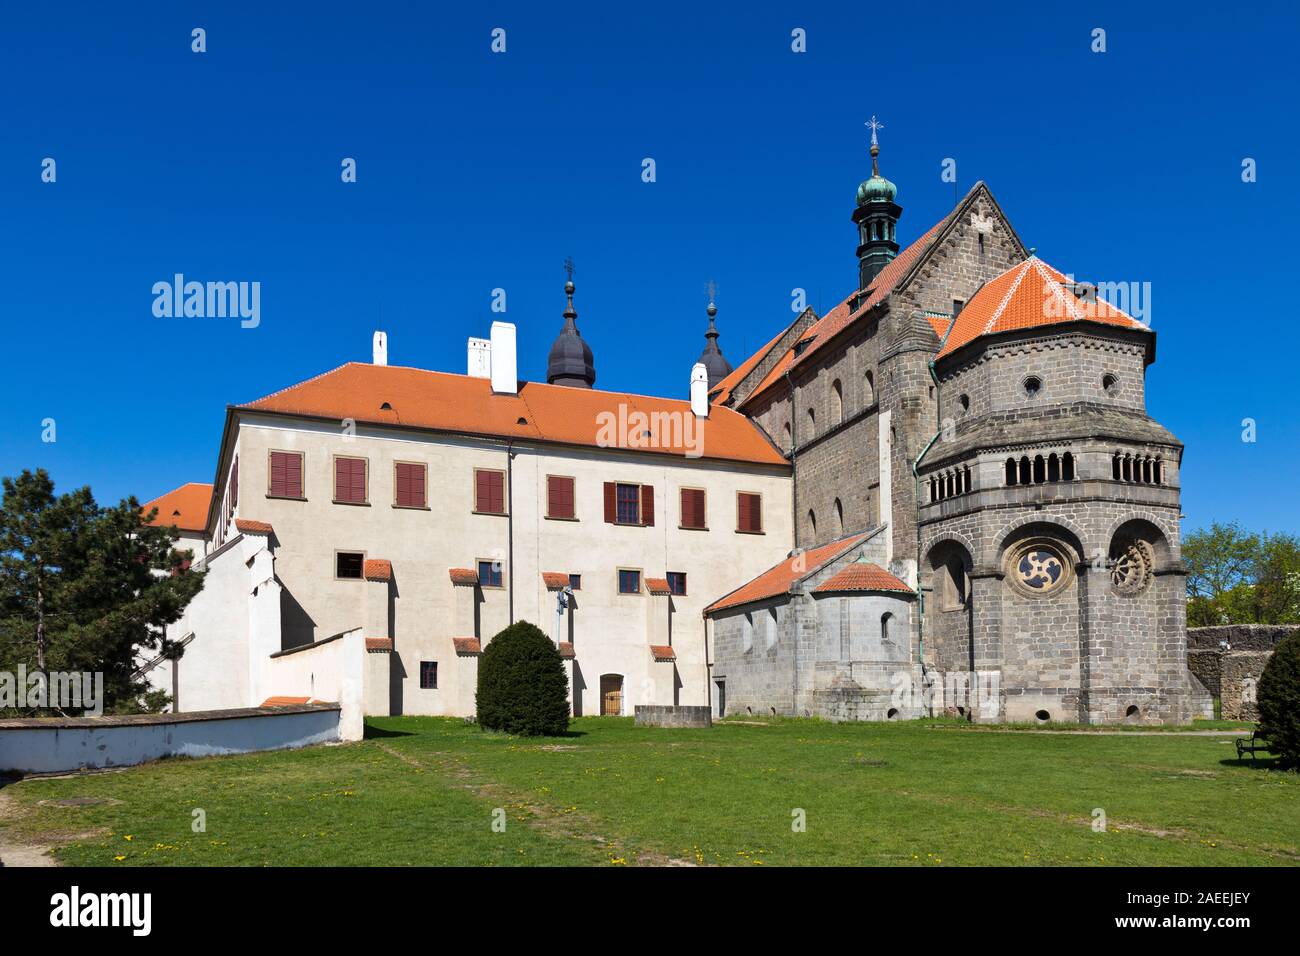 castle with museum, St. Procopius basilica and monastery, town Trebic (UNESCO, the oldest Middle ages settlement of jew community in Central Europe), Stock Photo